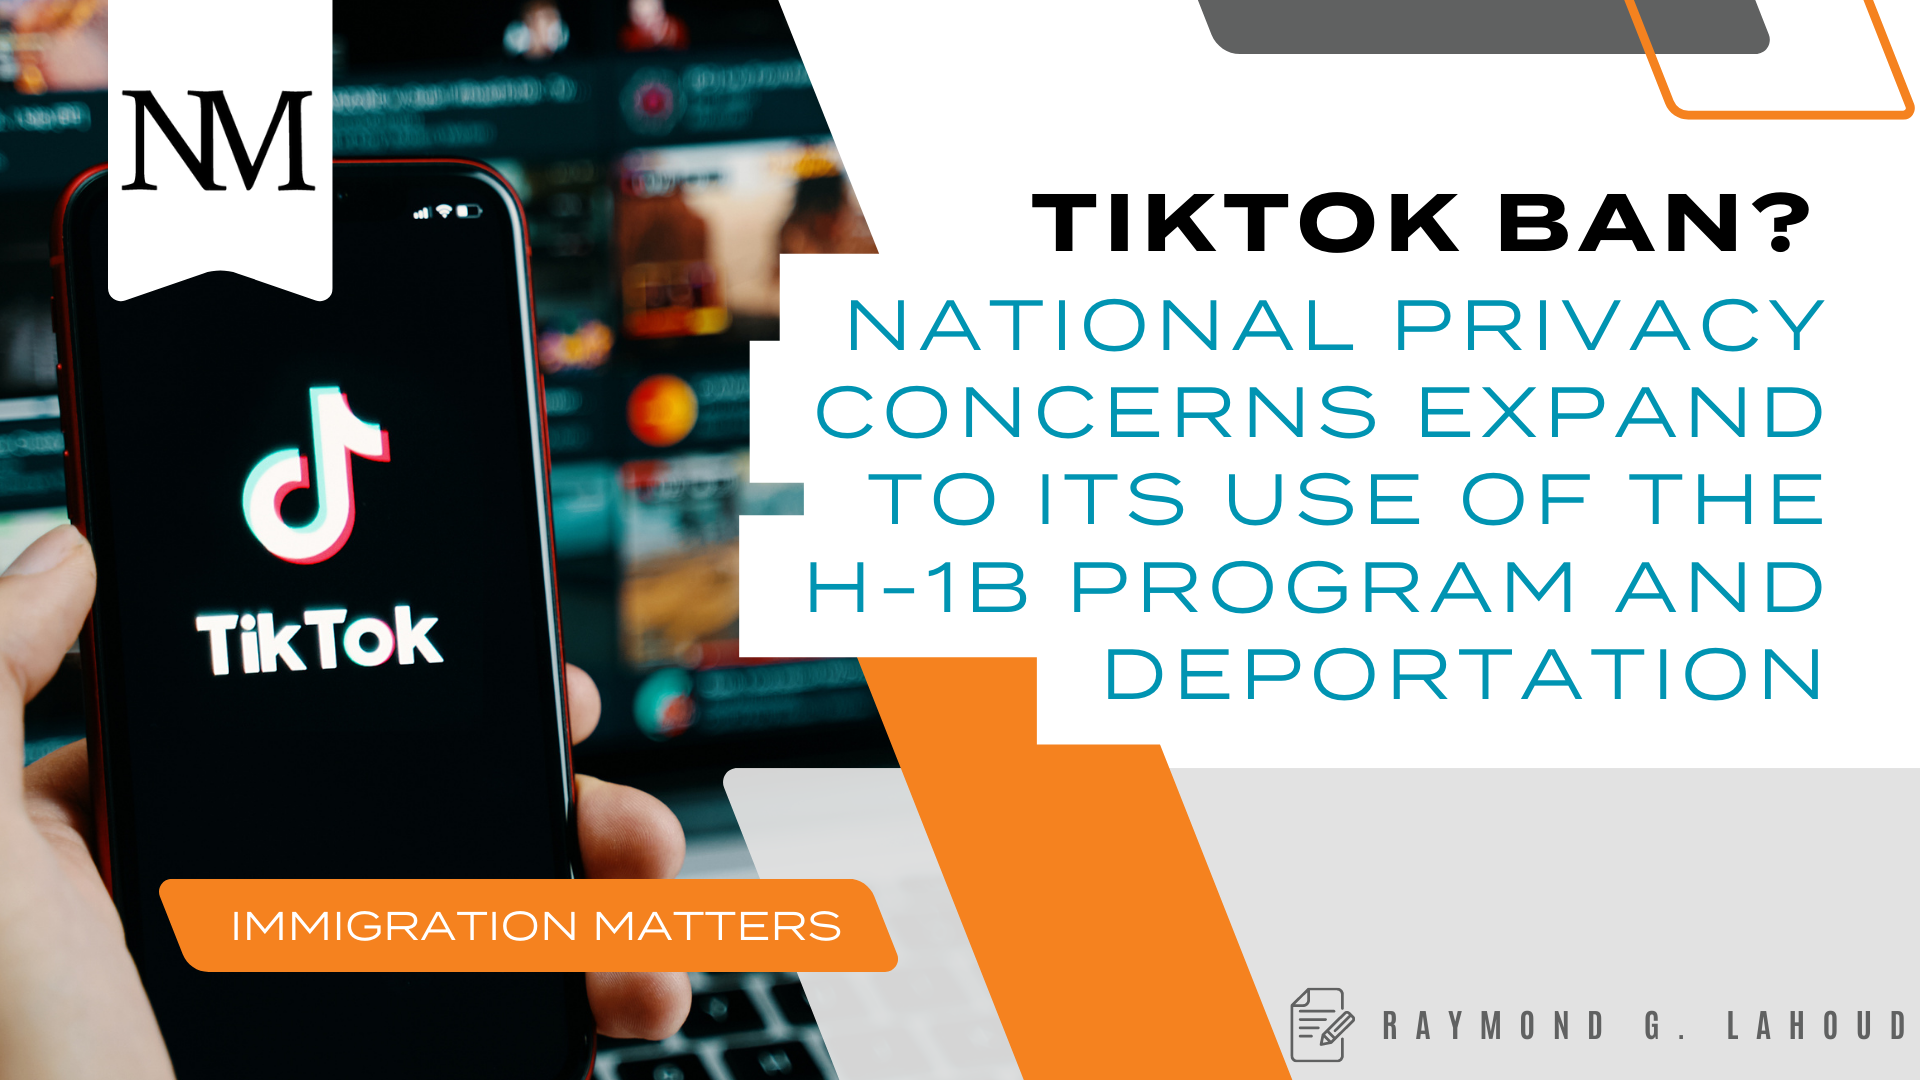 TikTok Ban? National Privacy Concerns Expand to its Use of the H-1B Program and Deportation